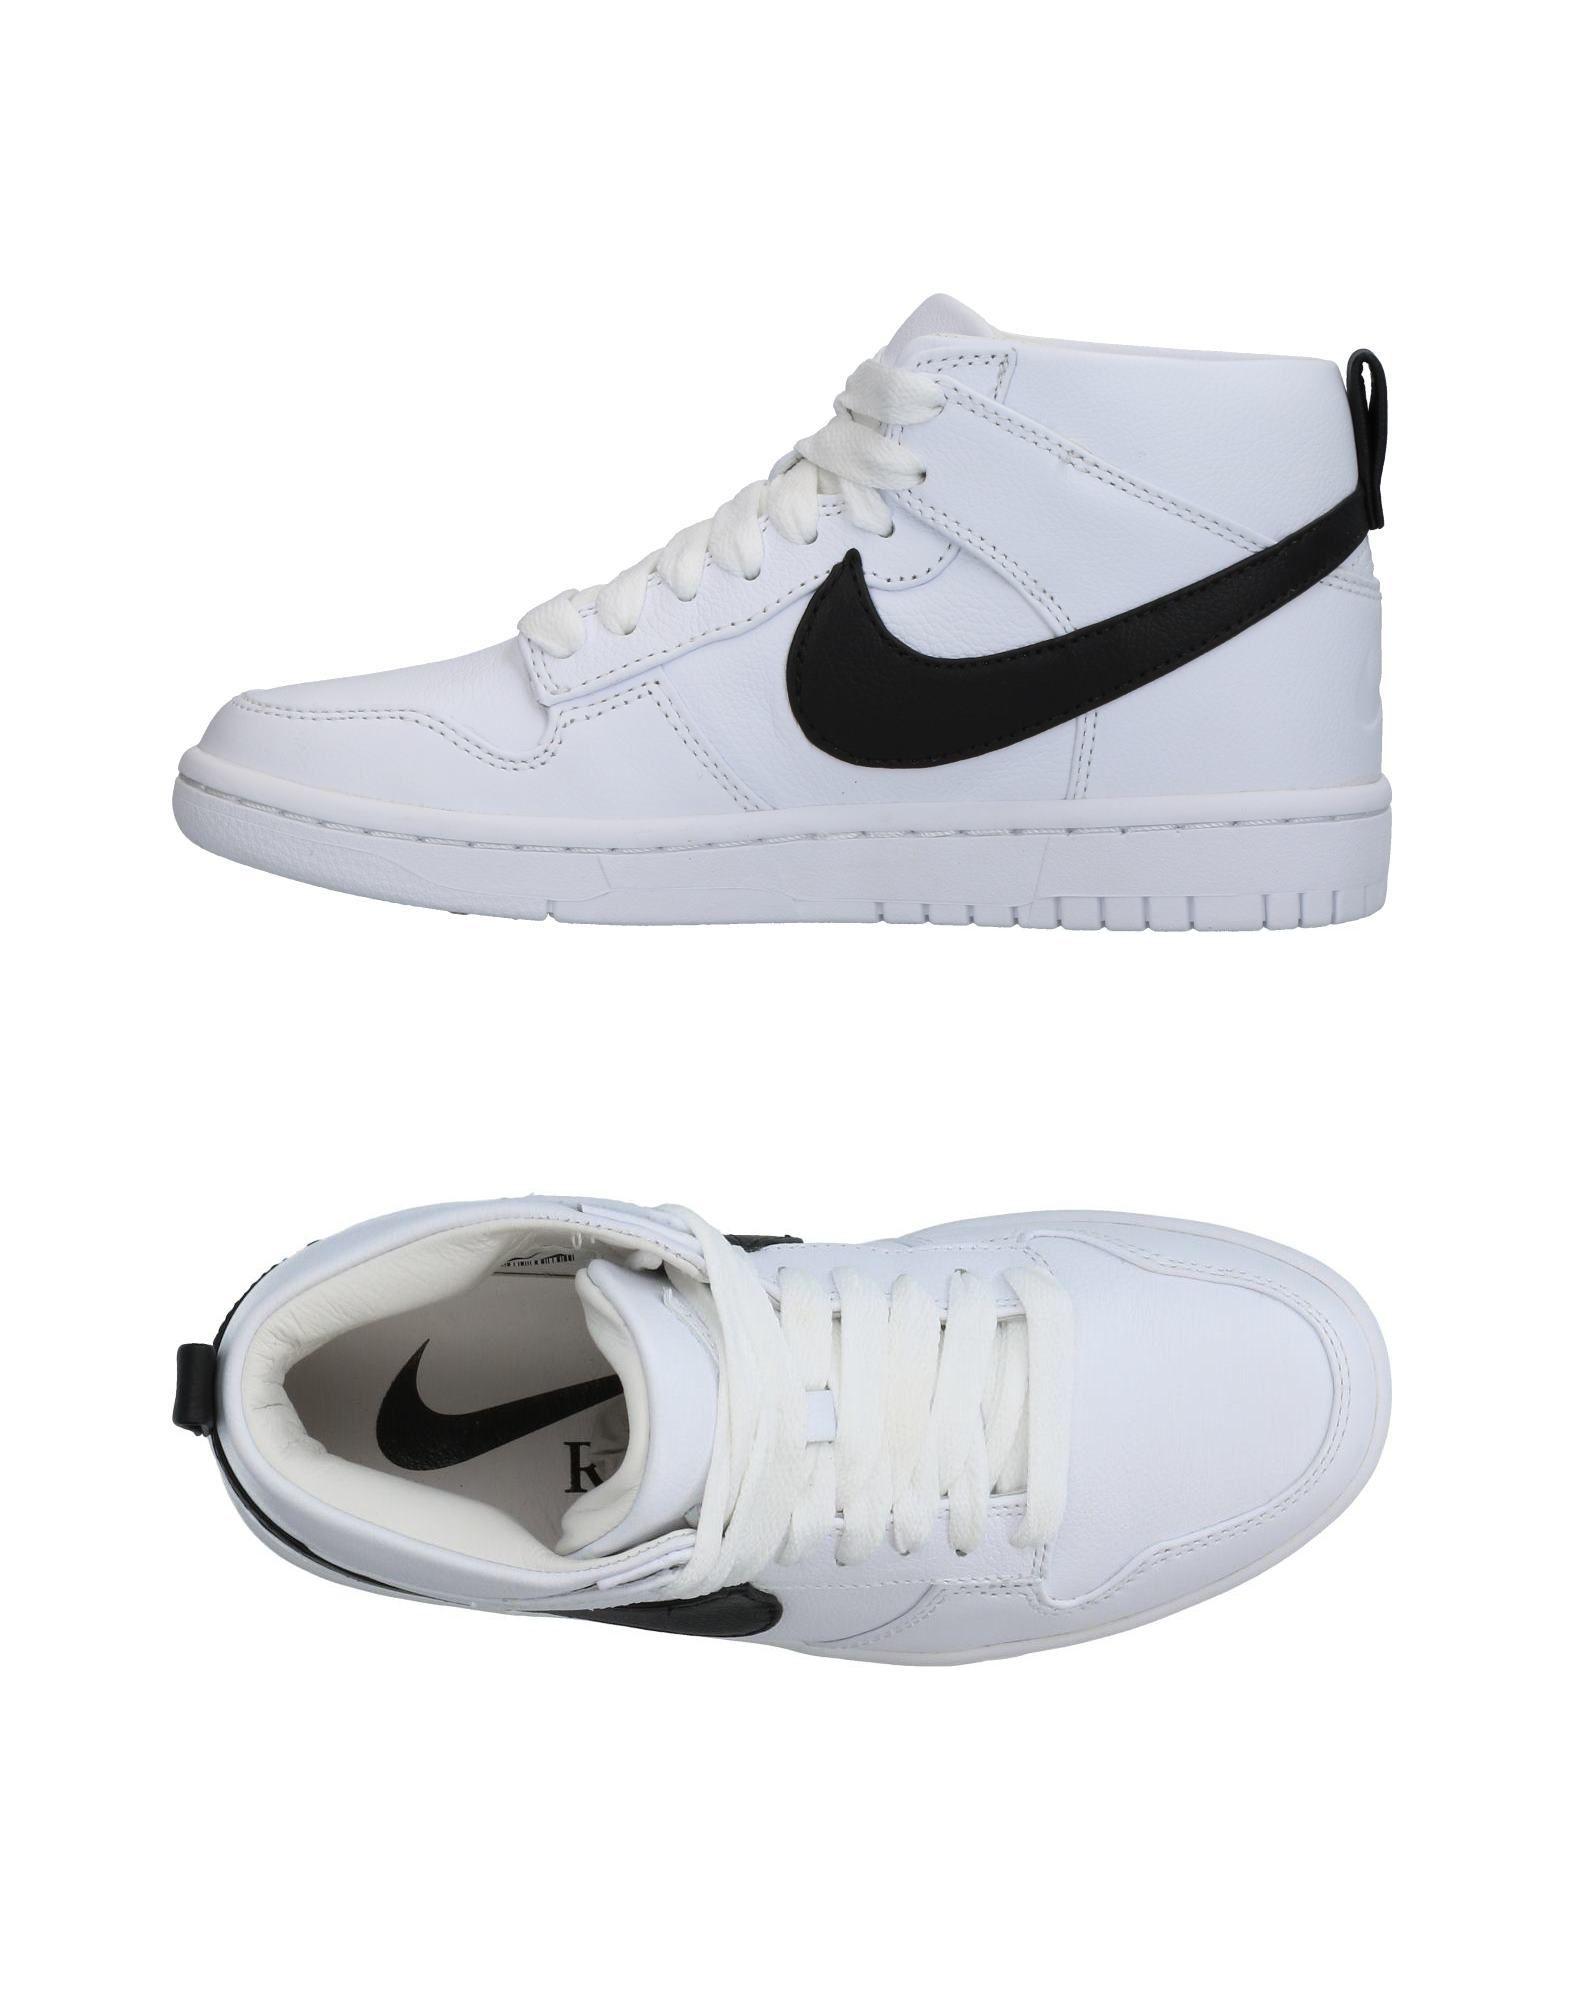 Lyst - Nike High-tops & Sneakers in White for Men